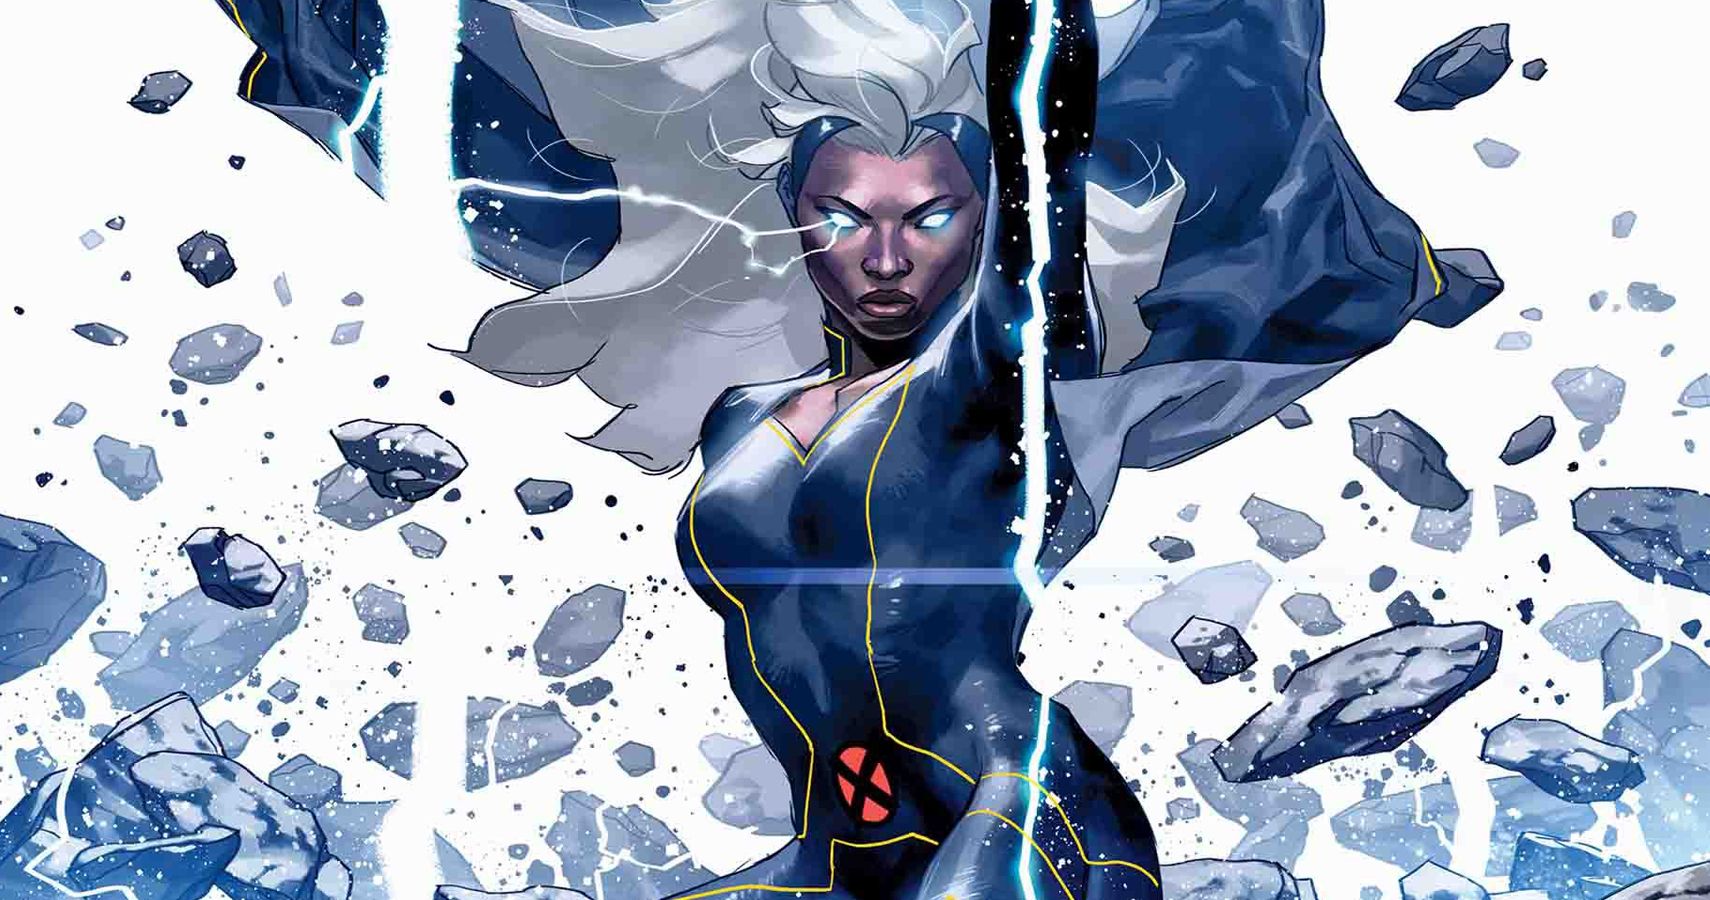 X Men 10 Times Storm Earned Her Status As An Omega Level Mutant